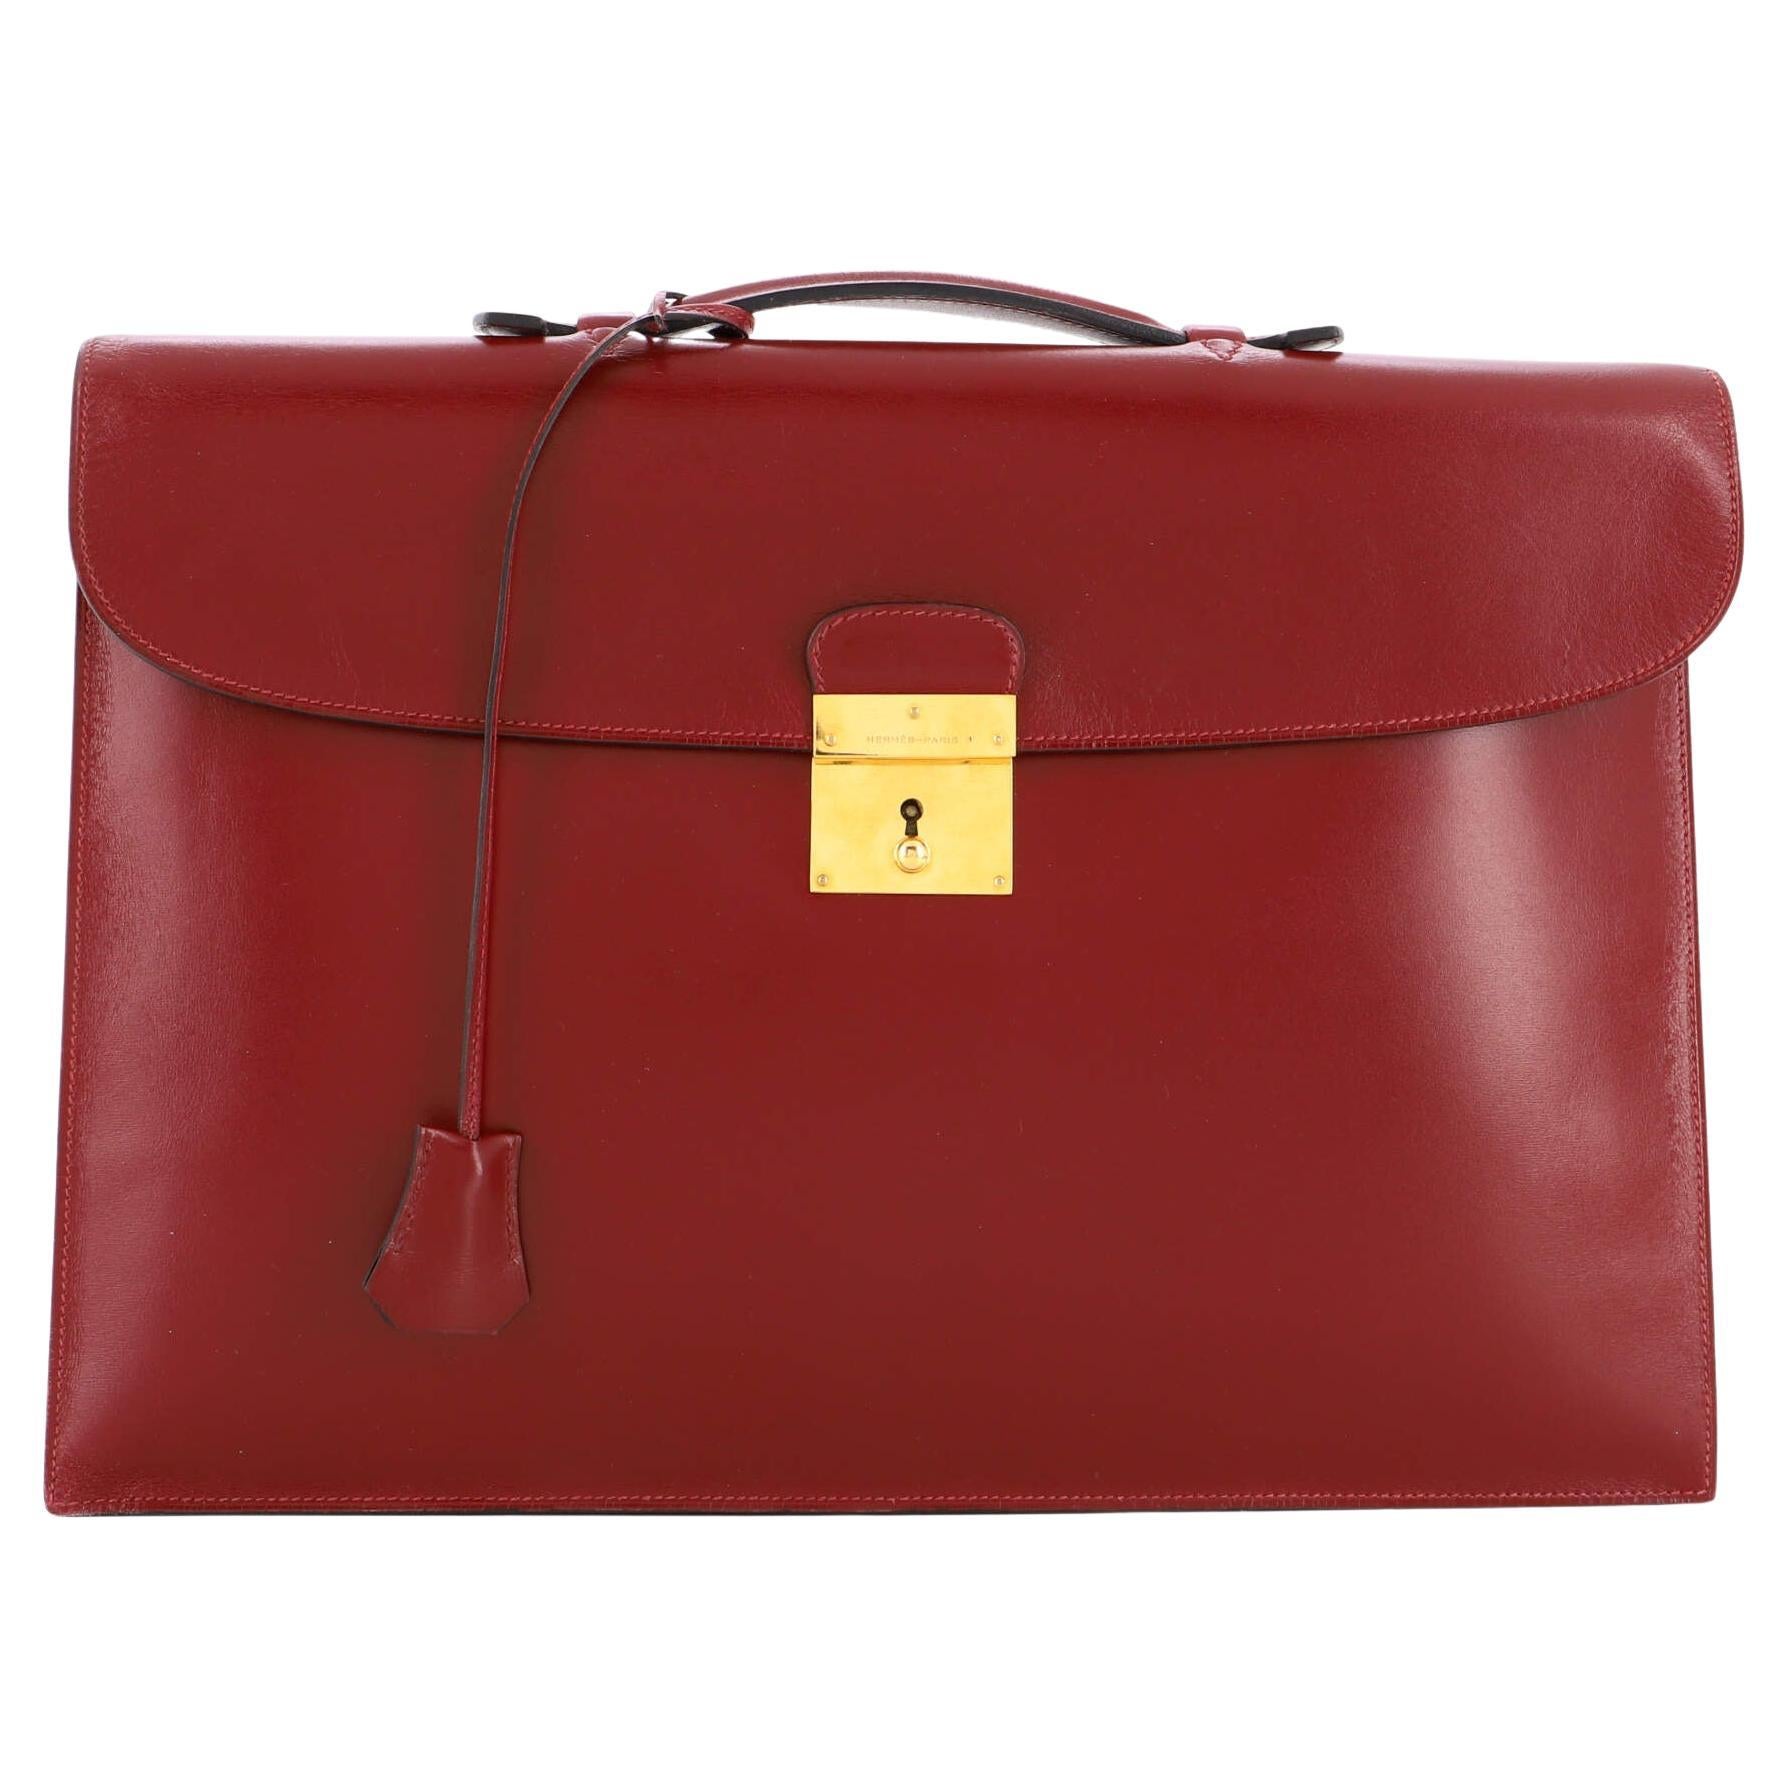 Hermes Kelly Depeche 34 in Togo and strap in Boxcalf